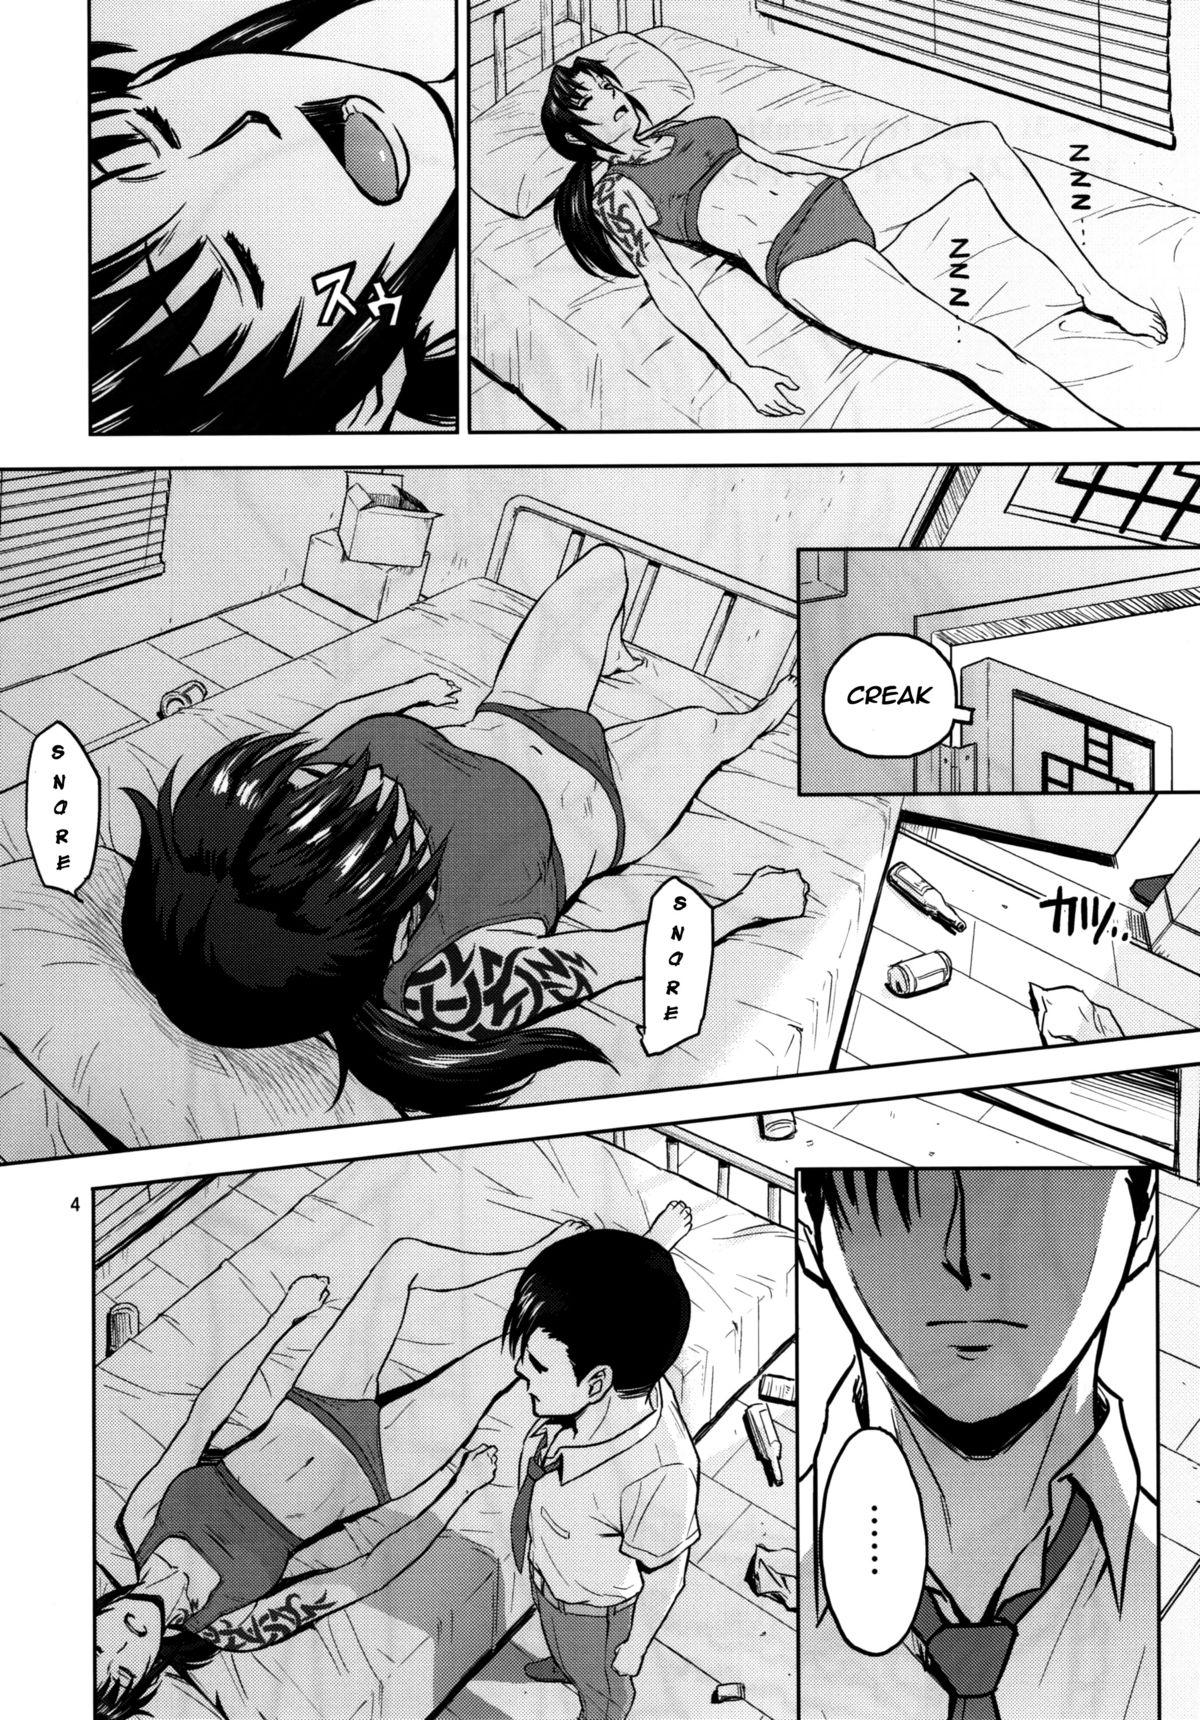 Tight Sick from drinking - Black lagoon Pervs - Page 4